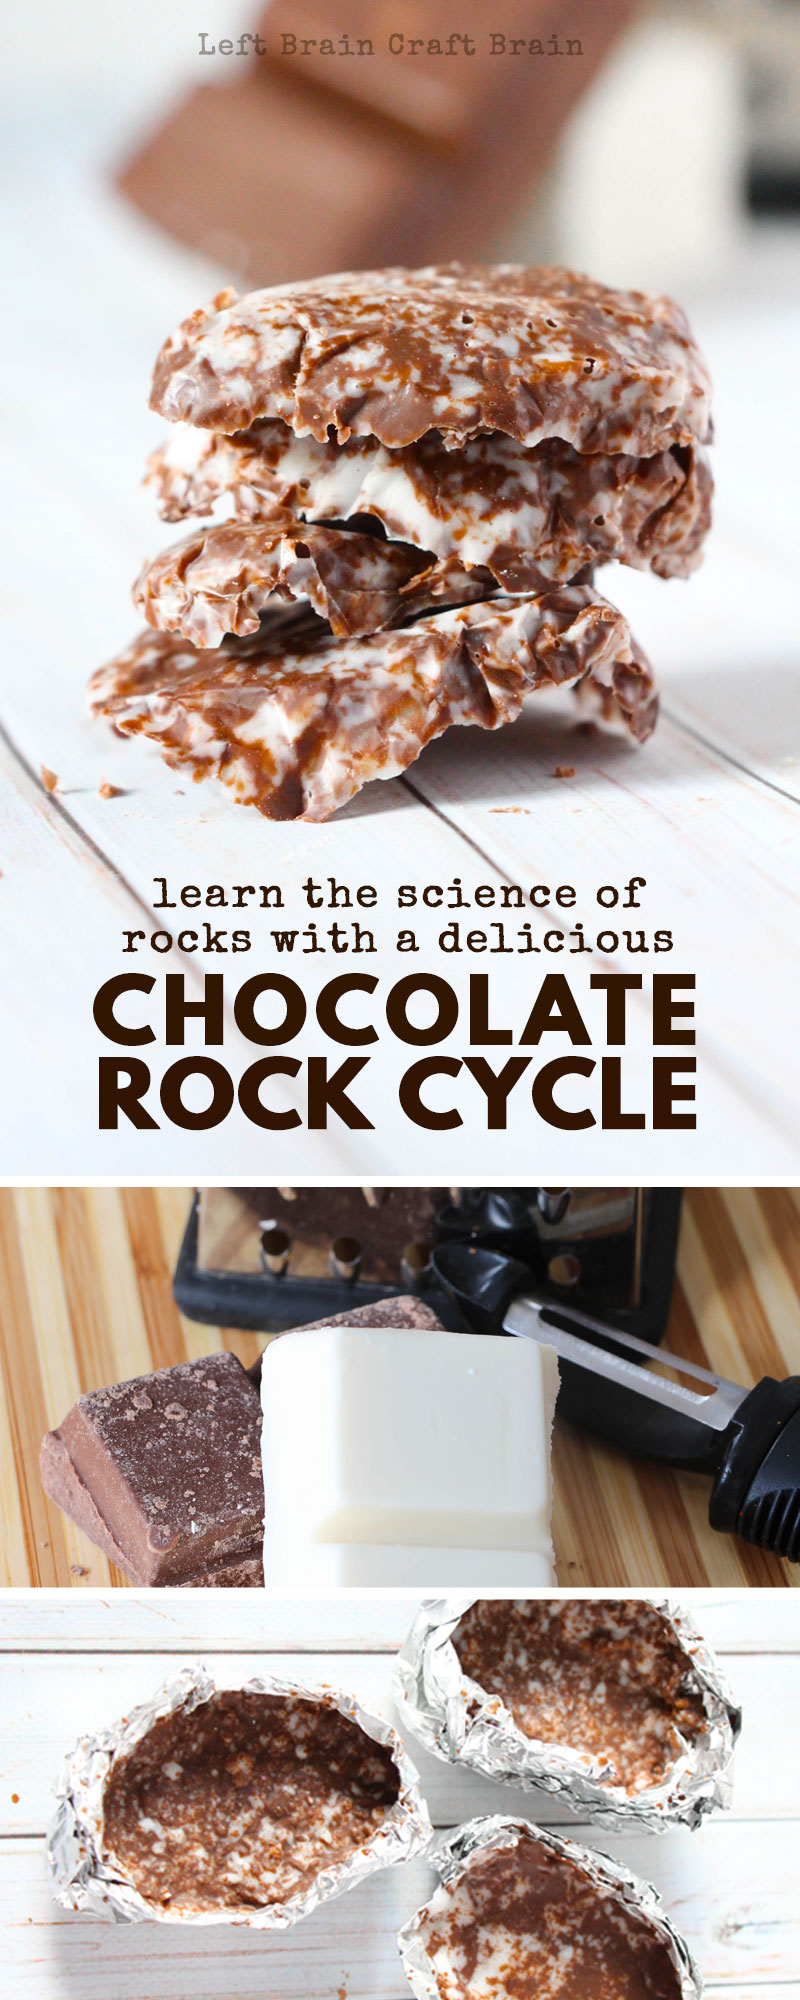 Learn about sedimentary, igneous, and metamorphic types of rocks with this delicious rock cycle made of chocolate rocks. Includes a printable rock cycle diagram perfect for classrooms and homeschool too.